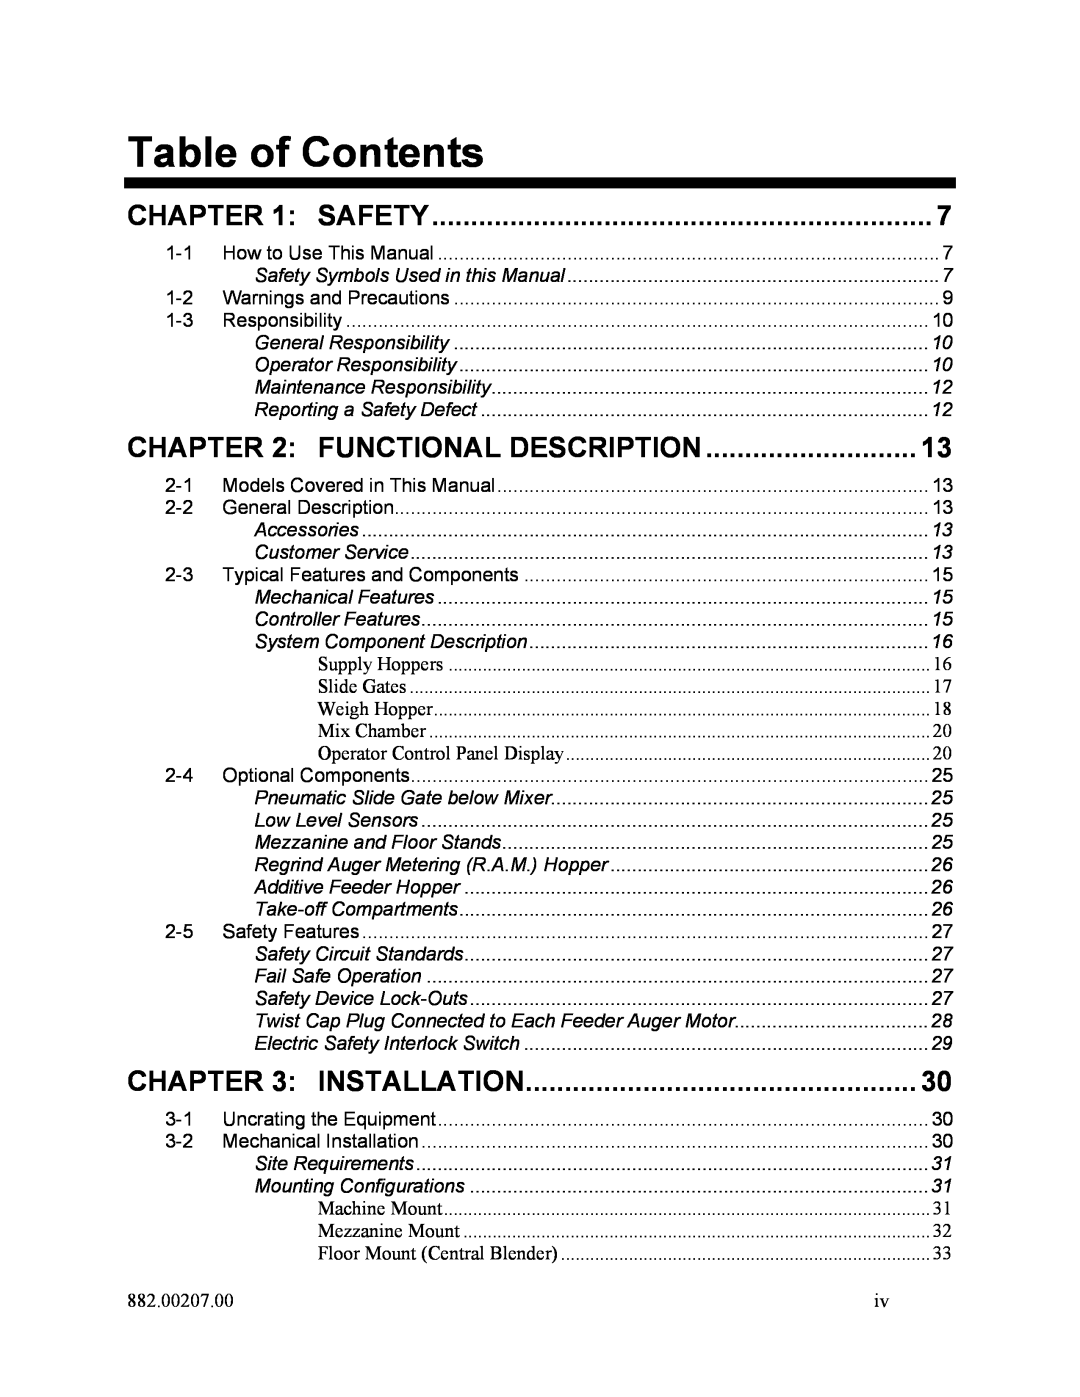 Mitsubishi Electronics 882.00207.00 specifications Table of Contents, Functional Description, Safety, Installation 